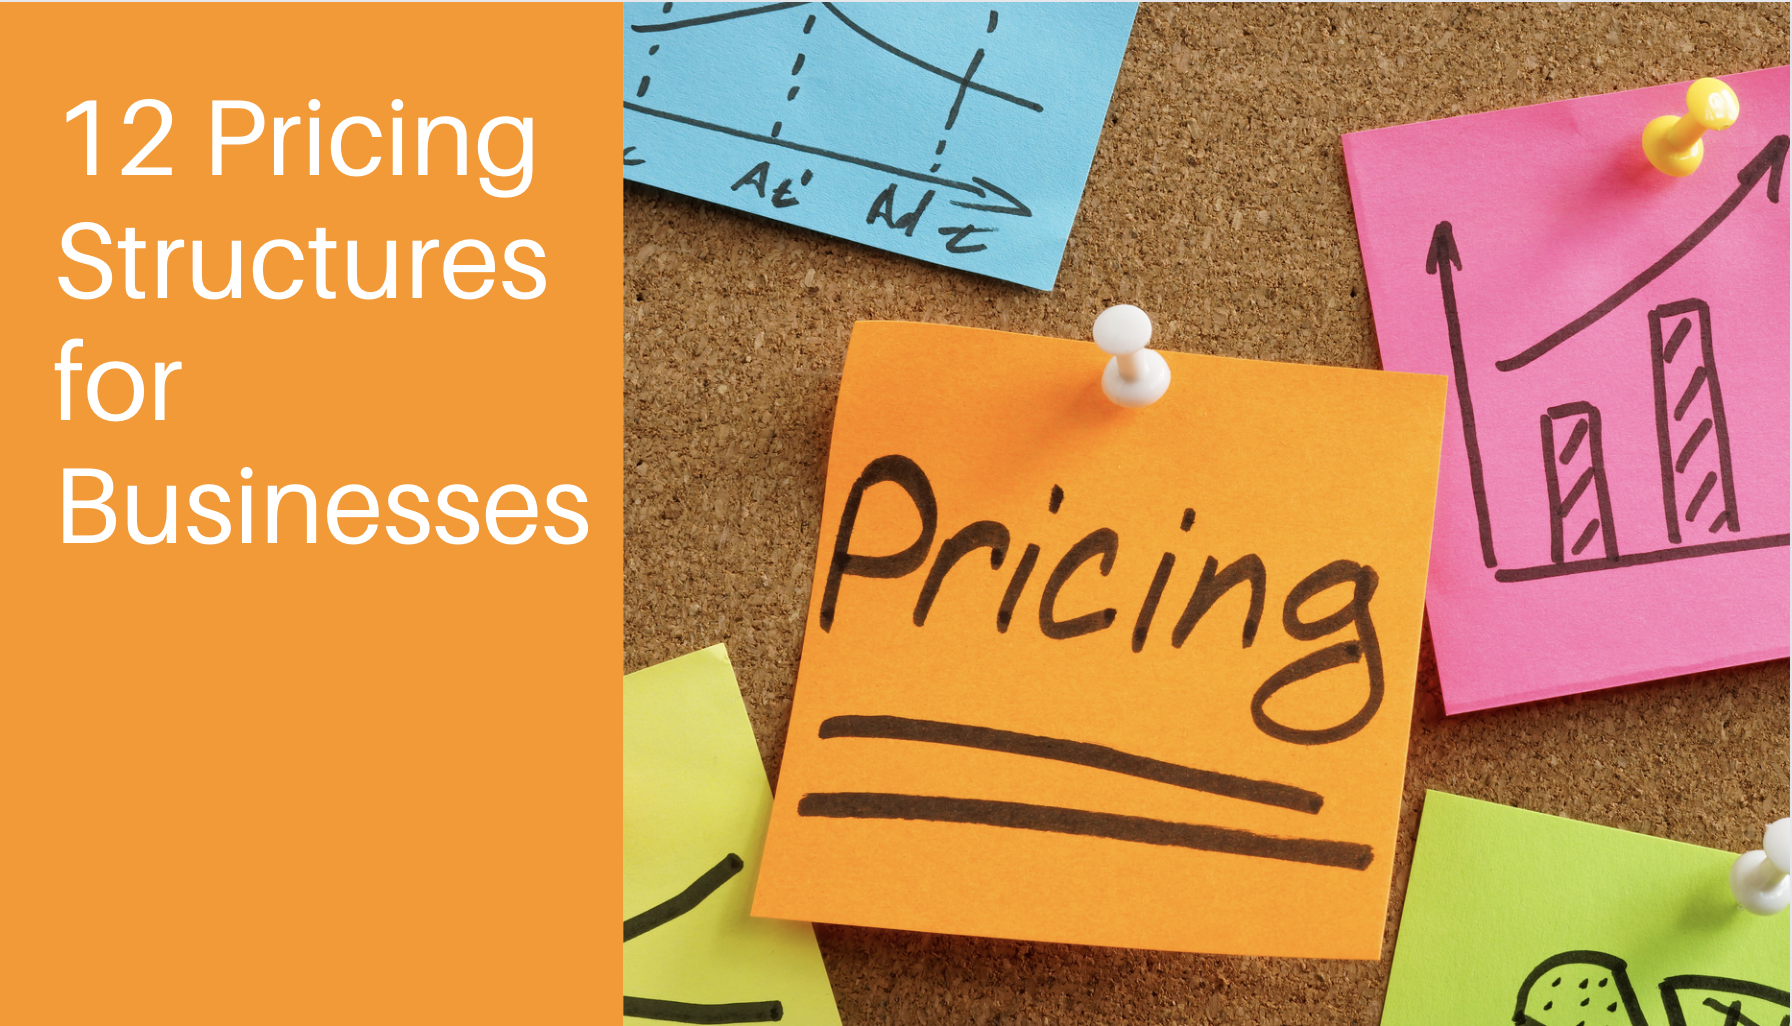 Pricing Structures for Businesses